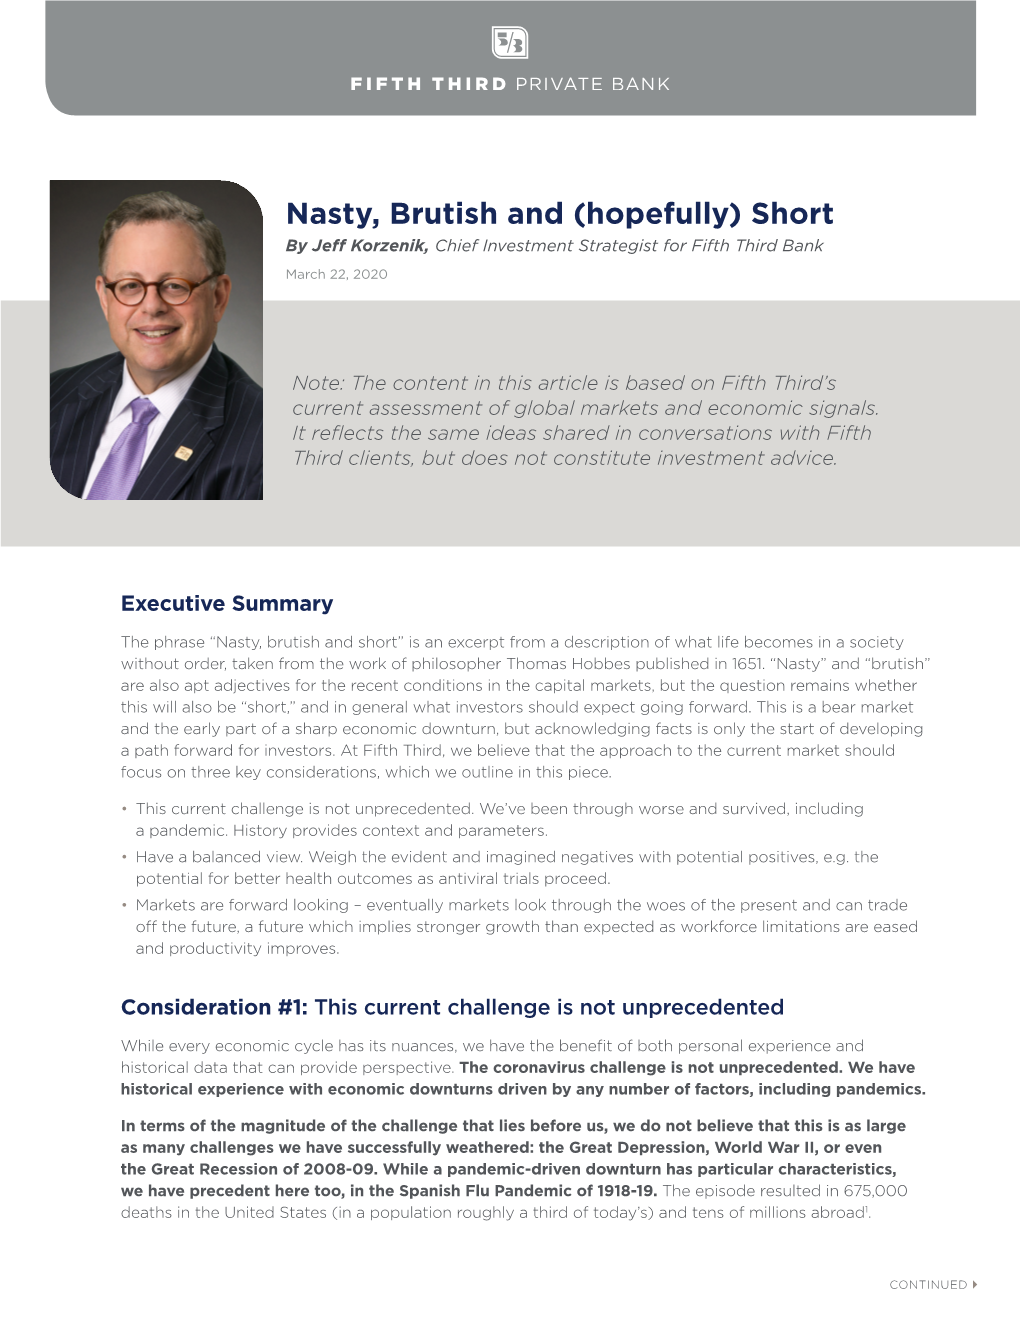 Nasty, Brutish and (Hopefully) Short by Jeff Korzenik, Chief Investment Strategist for Fifth Third Bank March 22, 2020